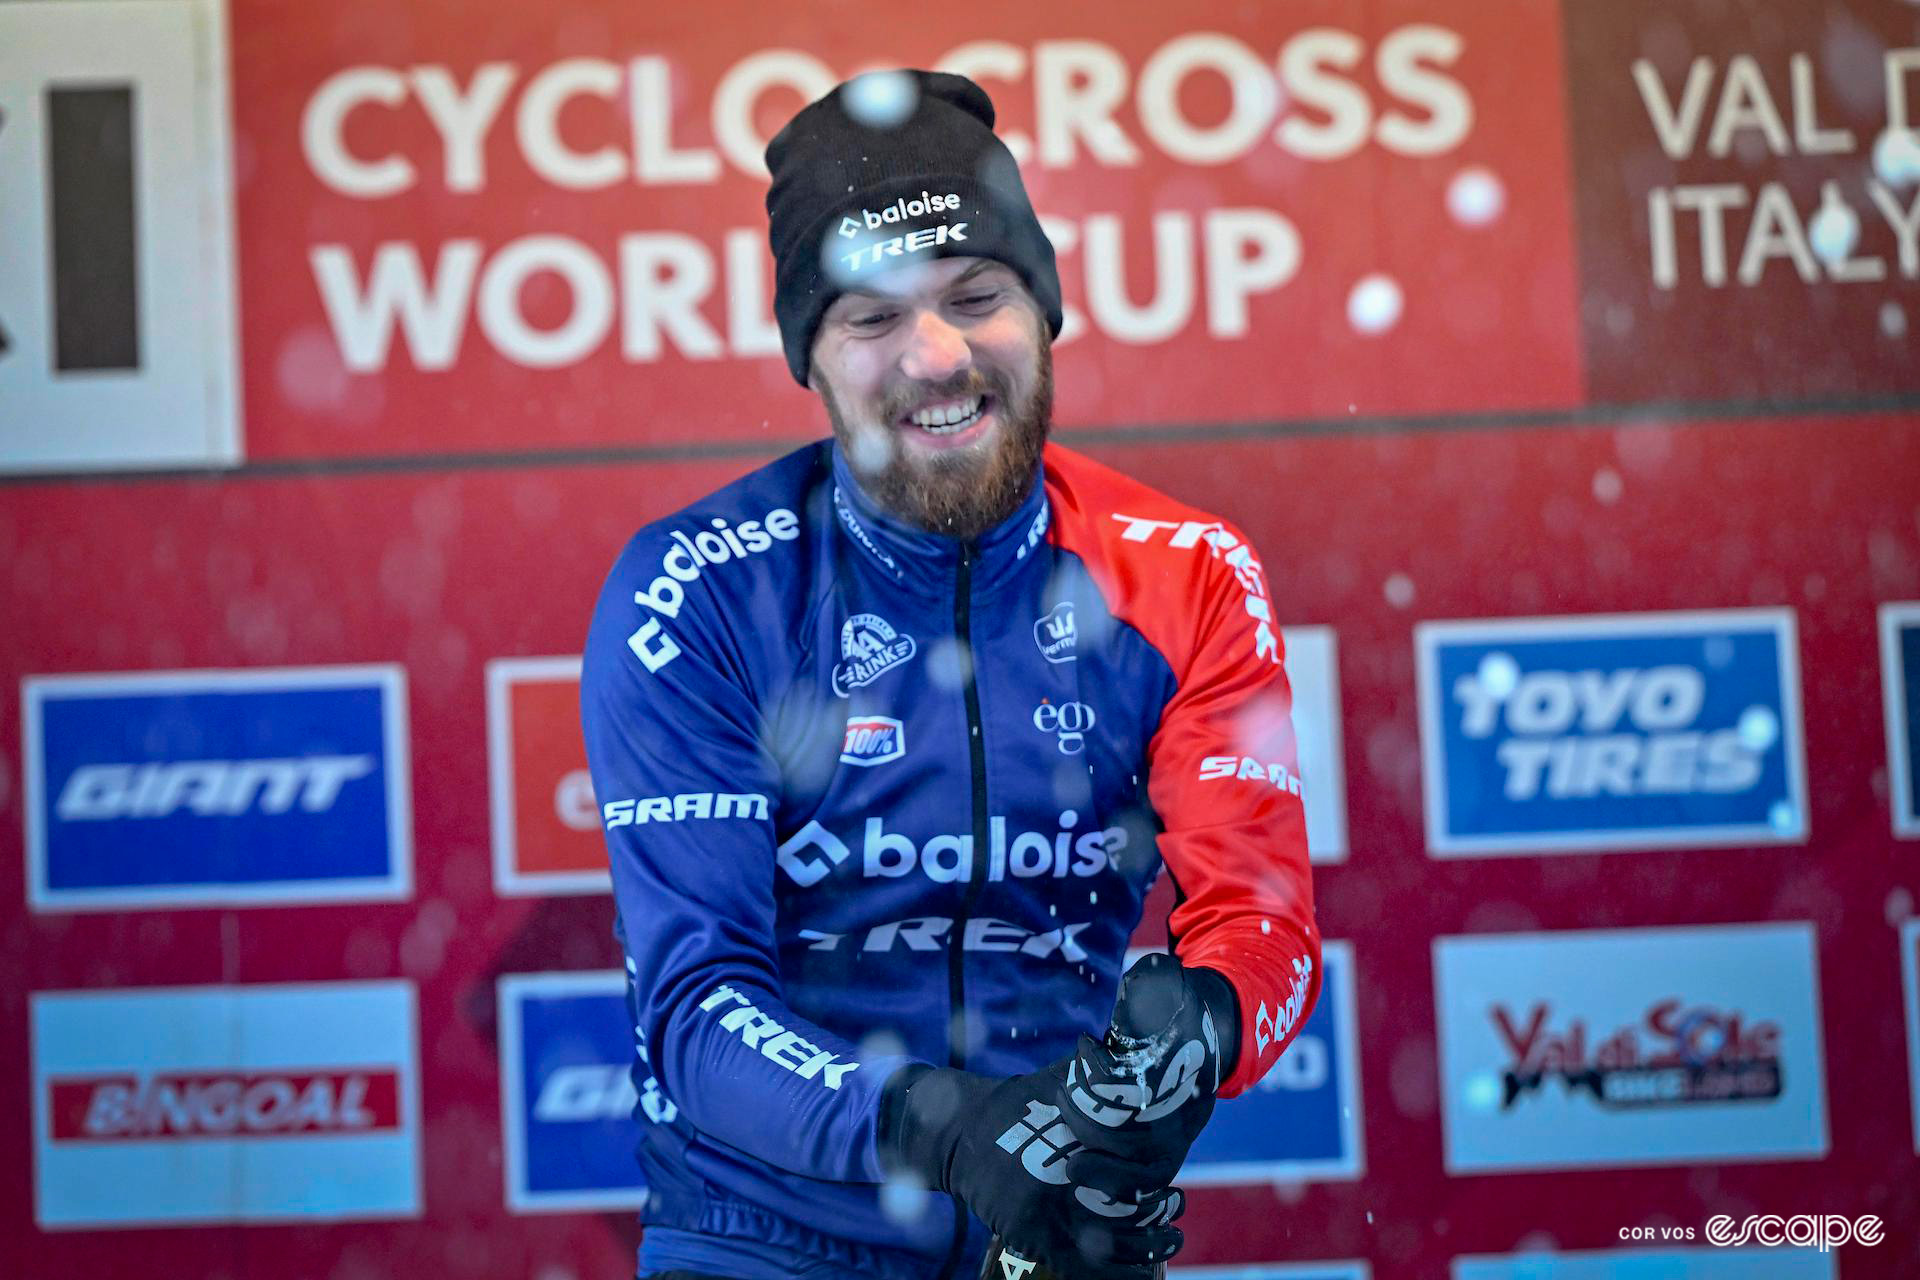 Joris Nieuwenhuis sprays Prosecco on the podium at UCI Cyclocross World Cup Val di Sole.